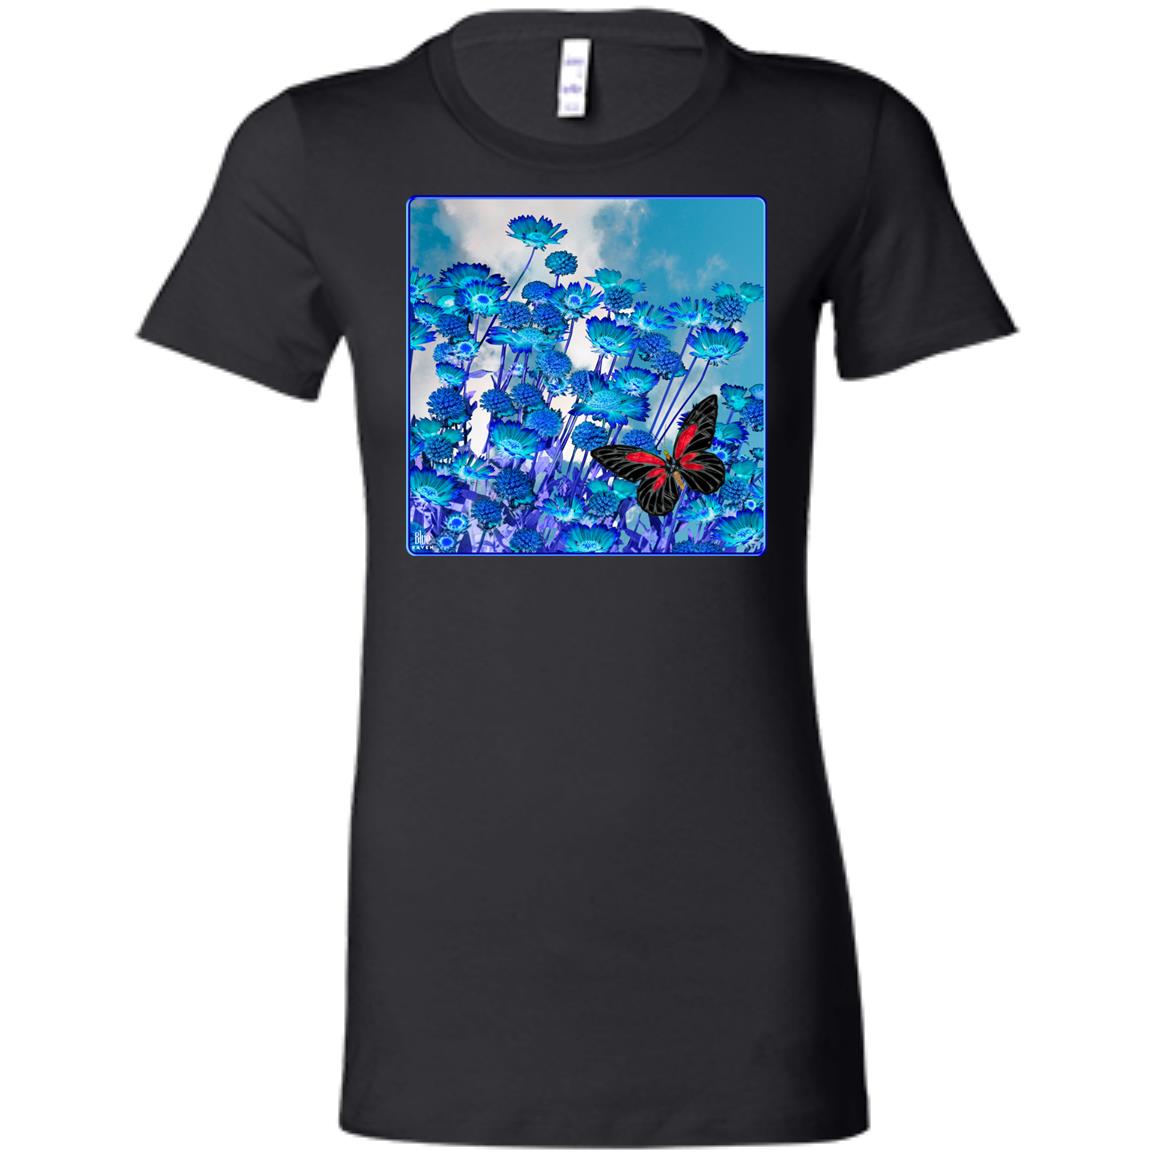 Blue Daisies - Women's Fitted T-Shirt